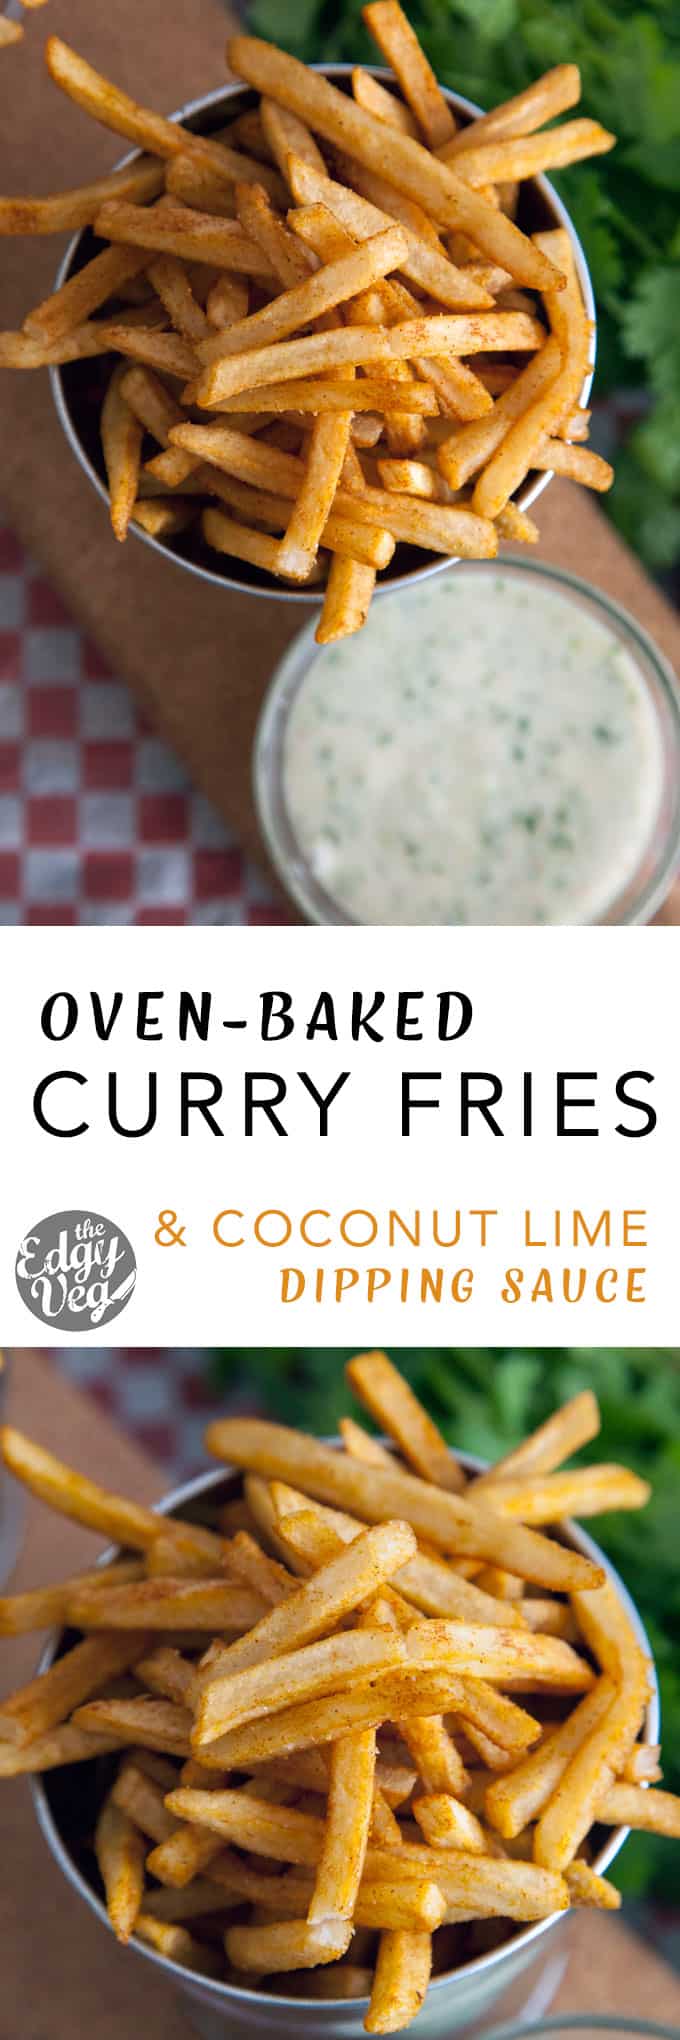 curry fries with coconut lime dip RECIPE